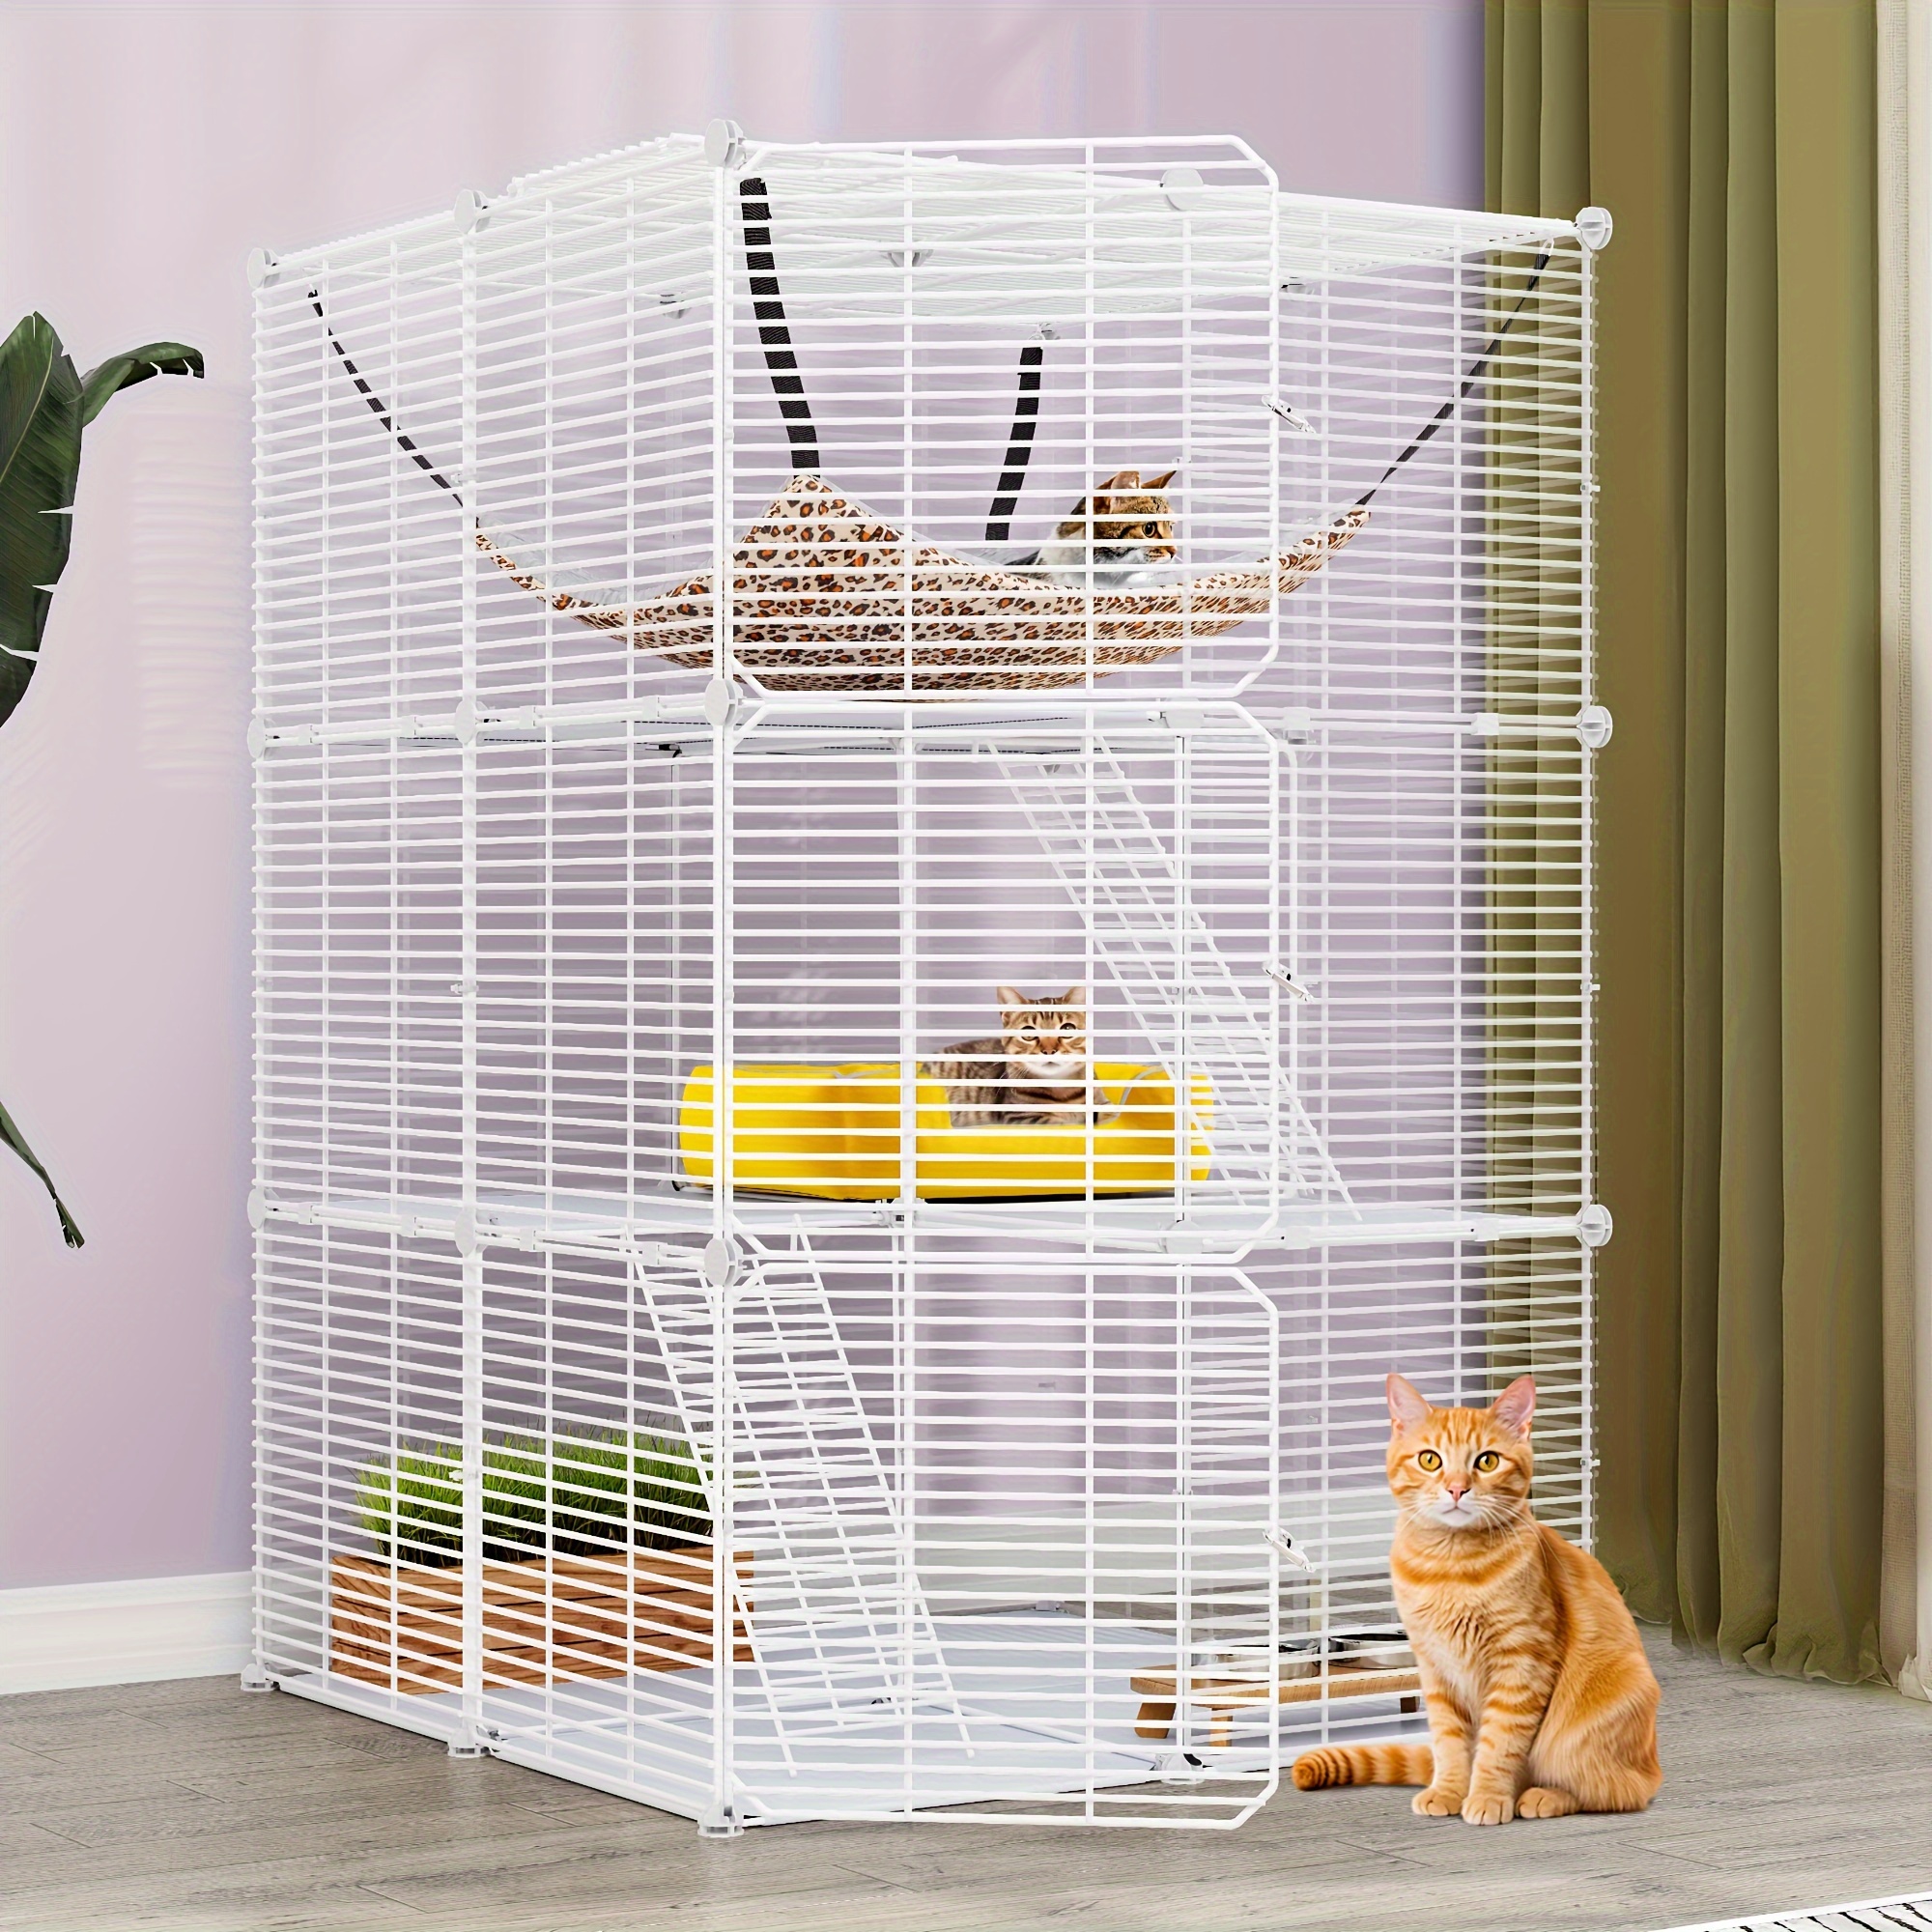 

Dwvo Cat Cage Indoor Cat Enclosures 3-tiers Diy Cat Playpen, Cat Cage With Metal Wire Dense, Cat Kennel With Extra Large Hammock For 1-2 Cats, Chinchilla, Rabbit, Small Animal, 72x72x104cm, White